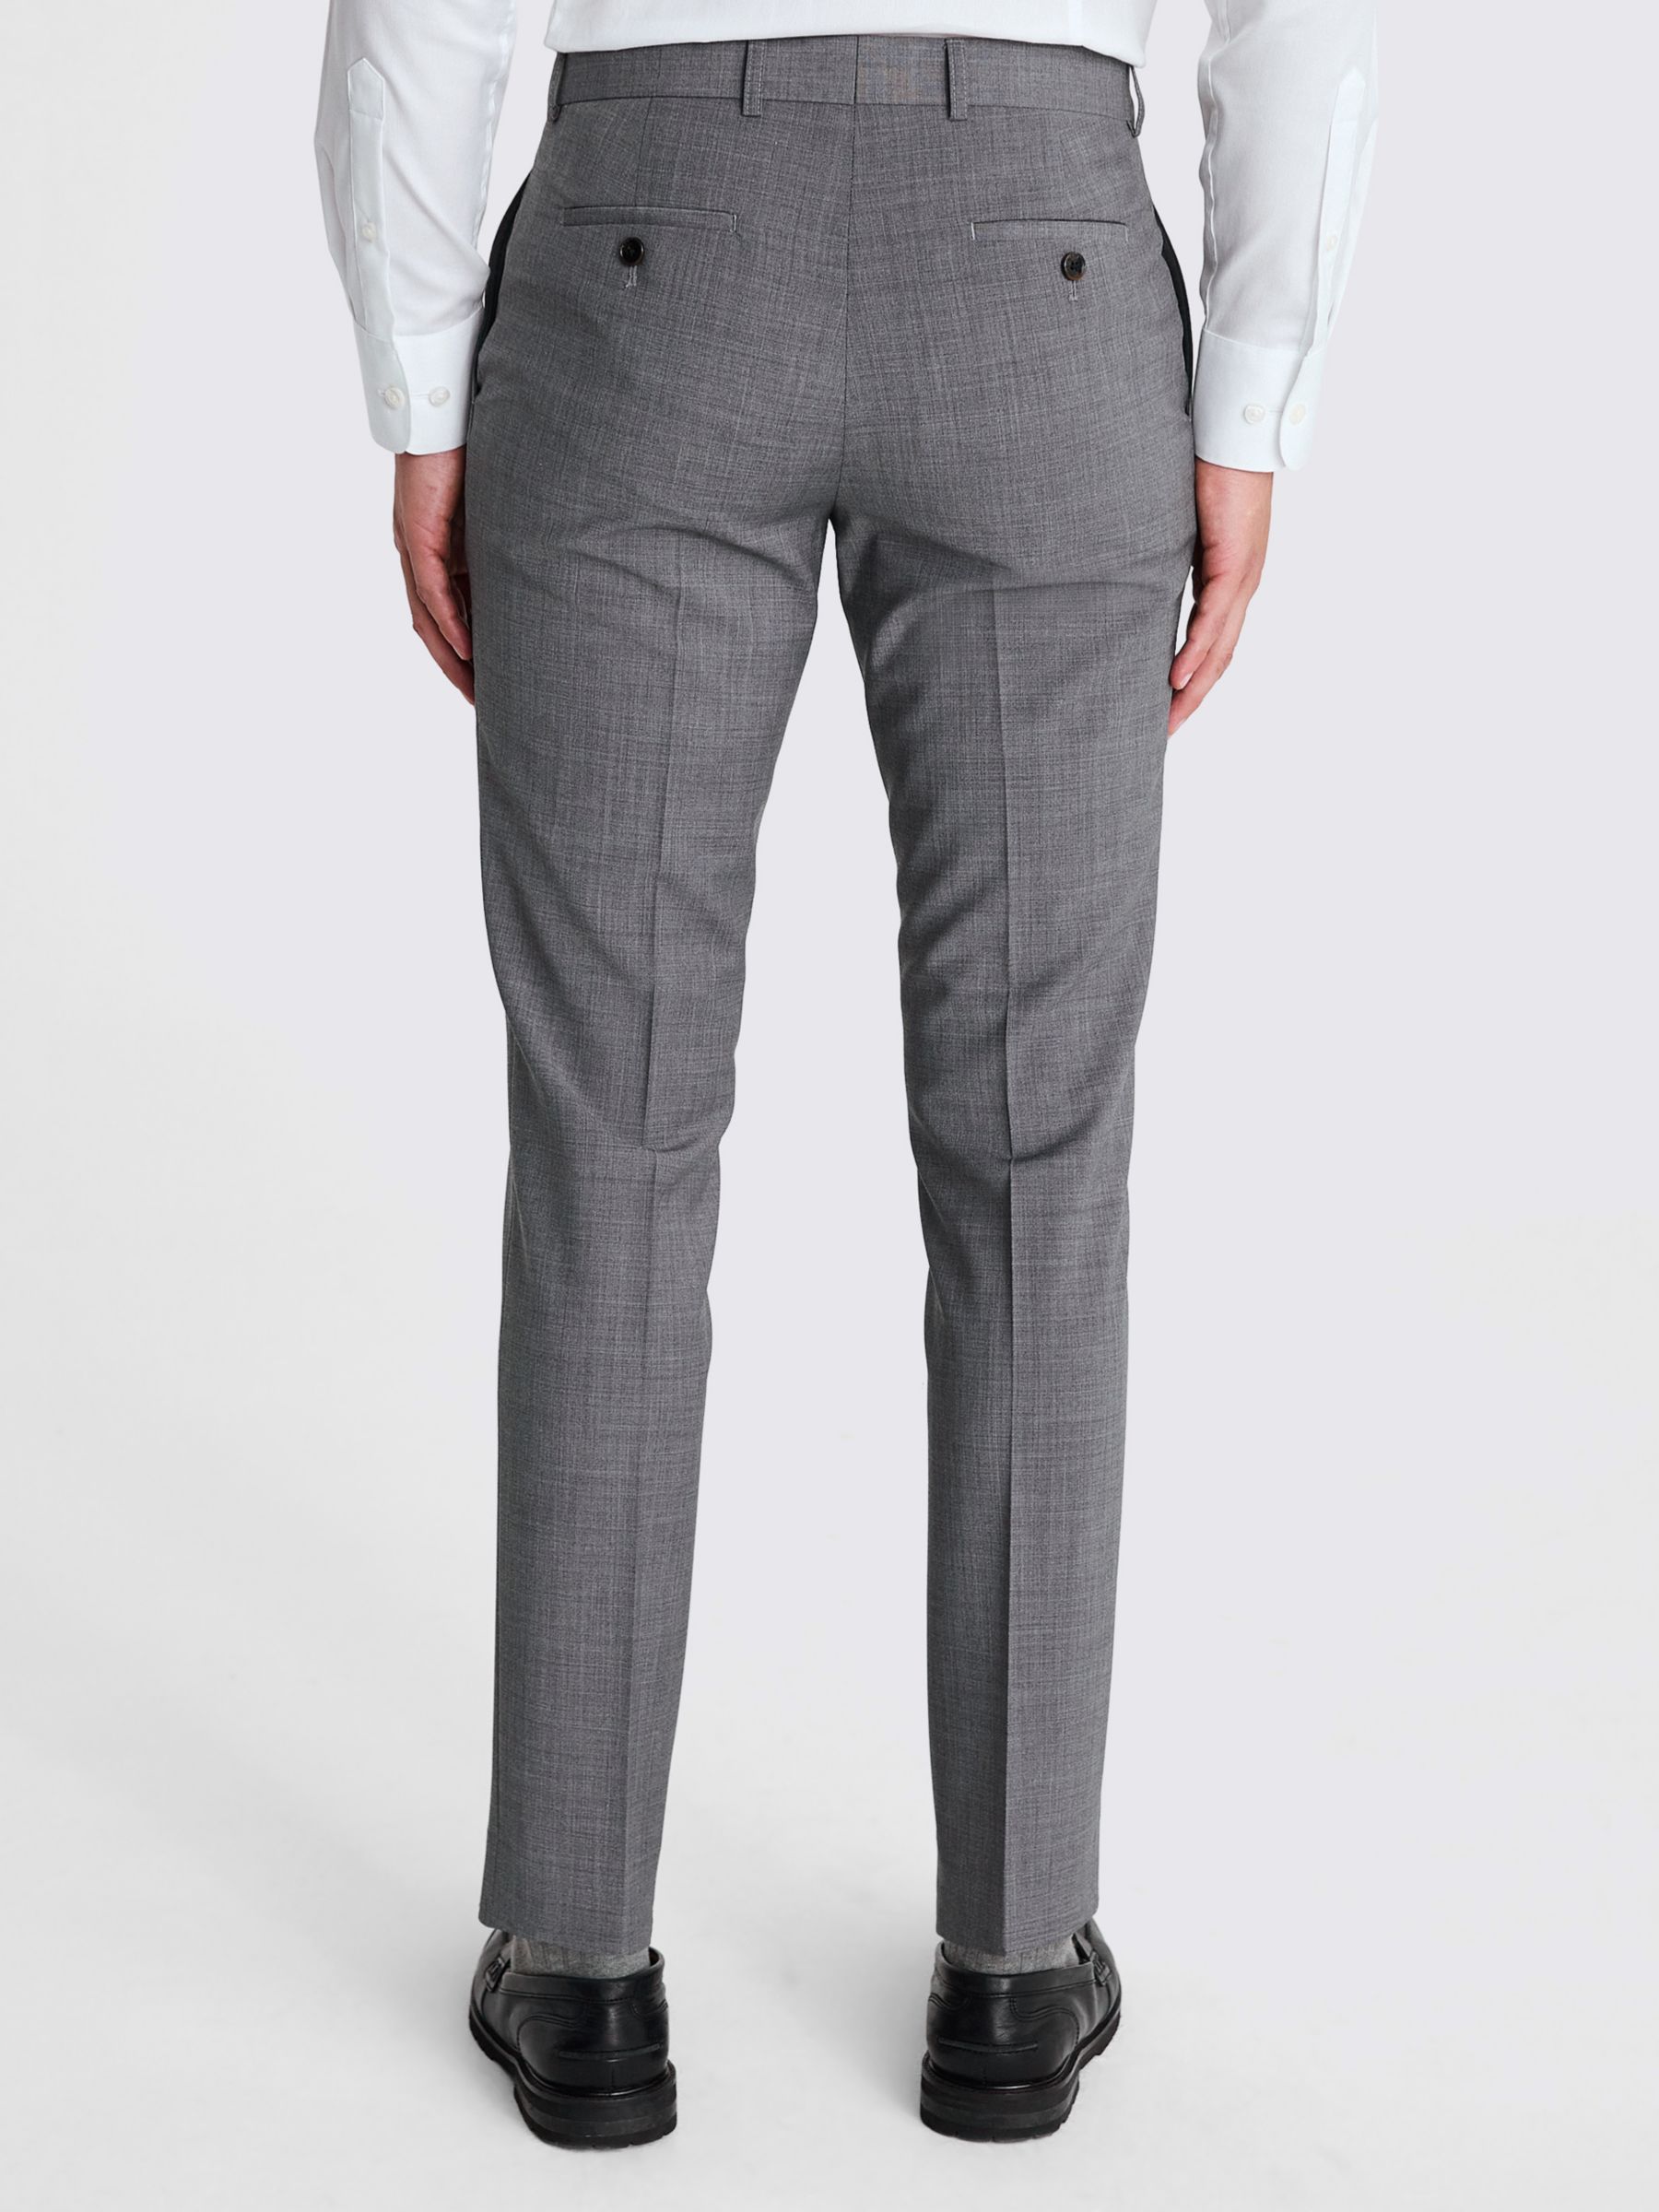 Buy Moss x DKNY Slim Fit Wool Blend Suit Trousers, Grey Online at johnlewis.com